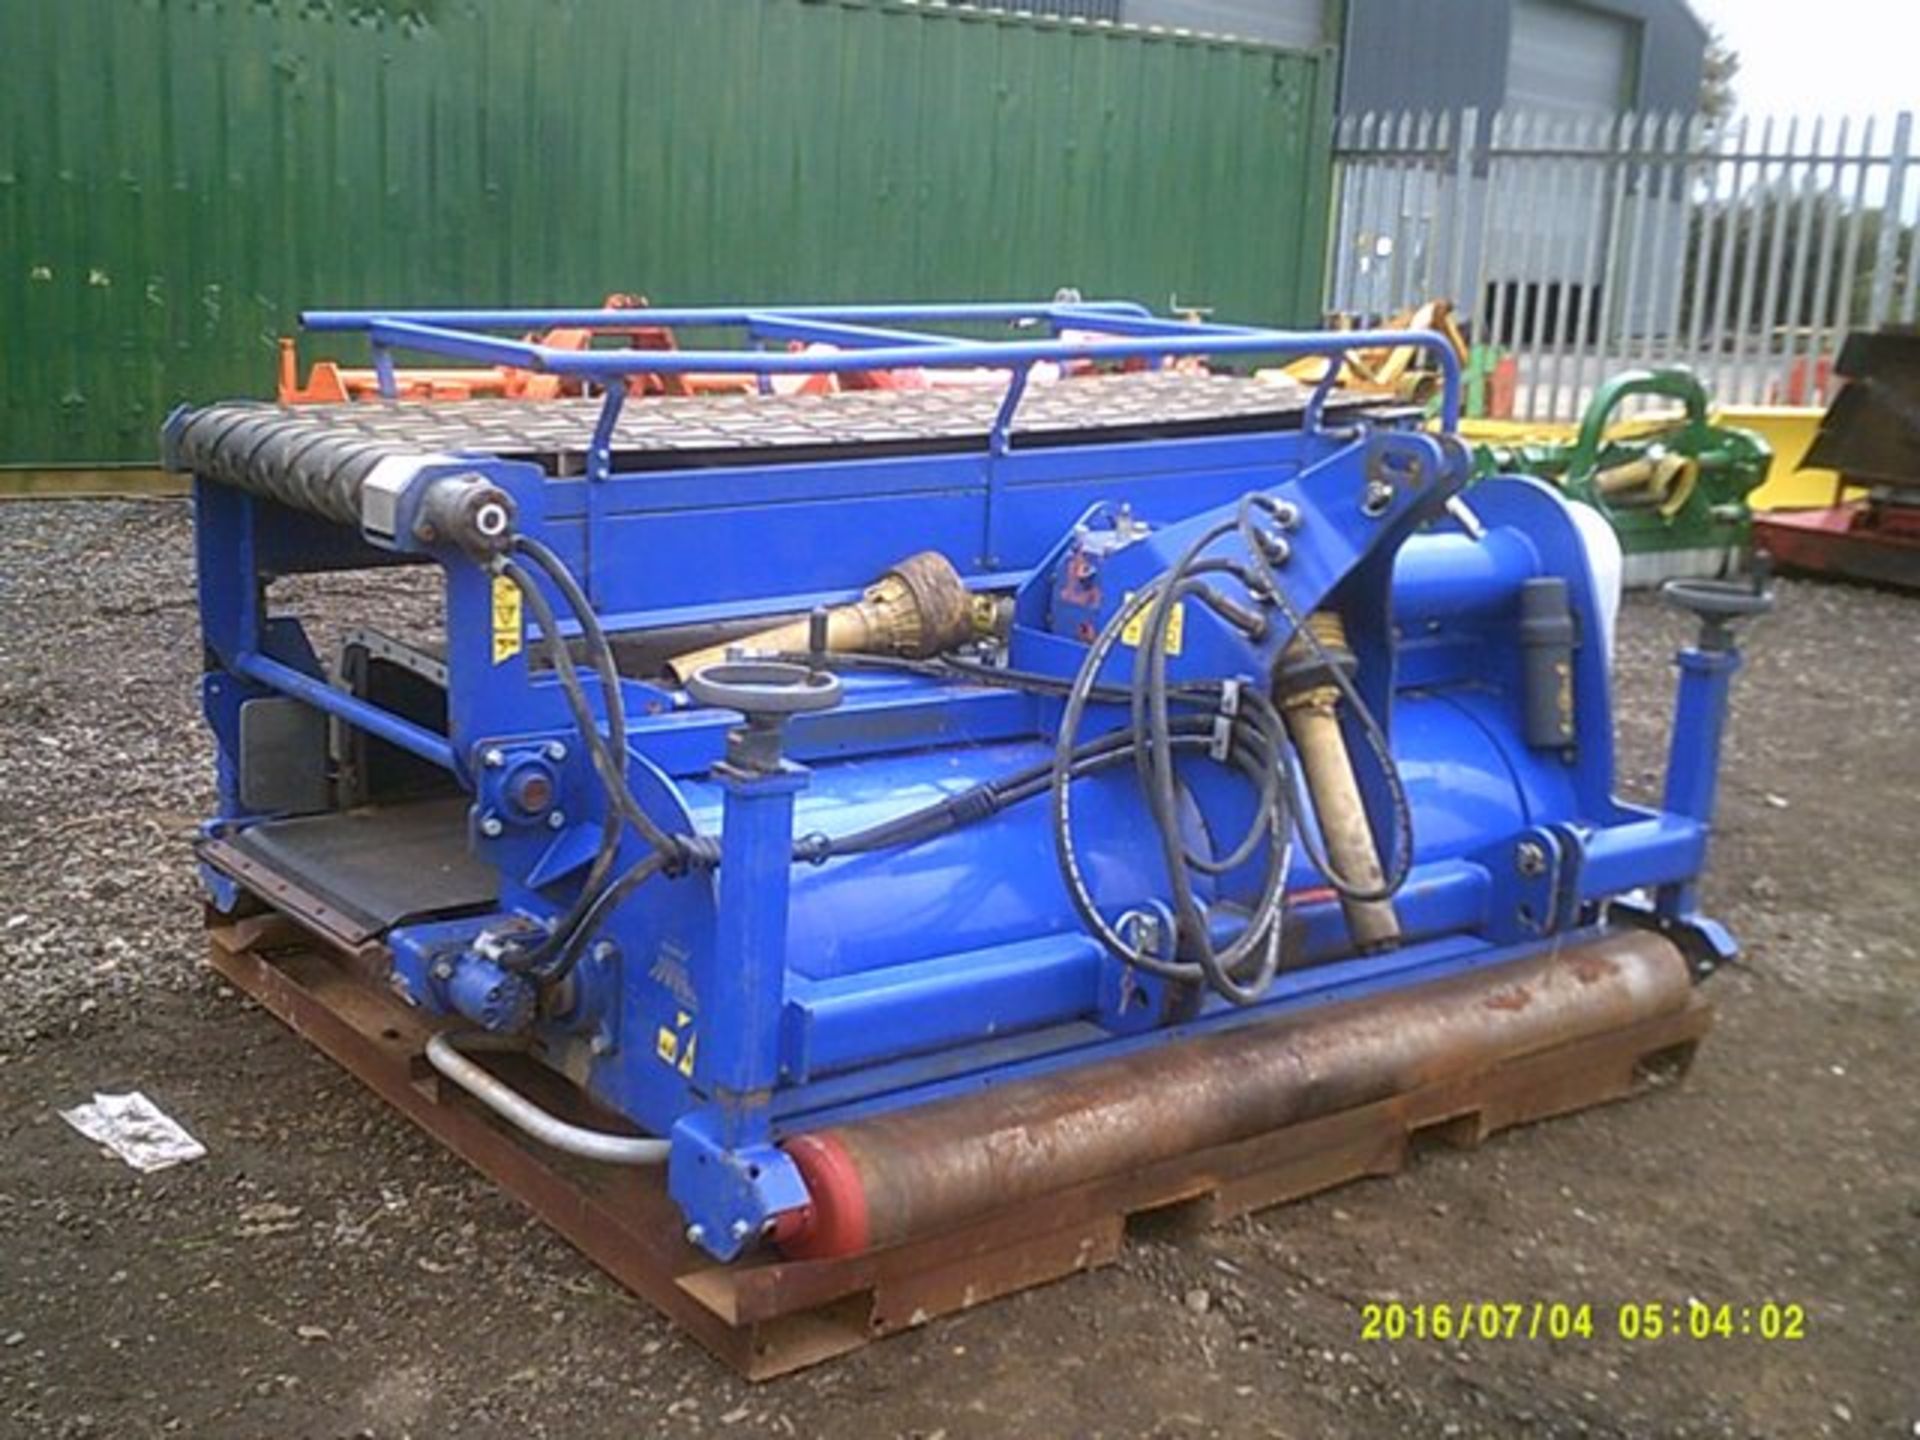 Koro FTM 2000 field top maker fitted with terra plane rotor Serial no. 22135, year 2013